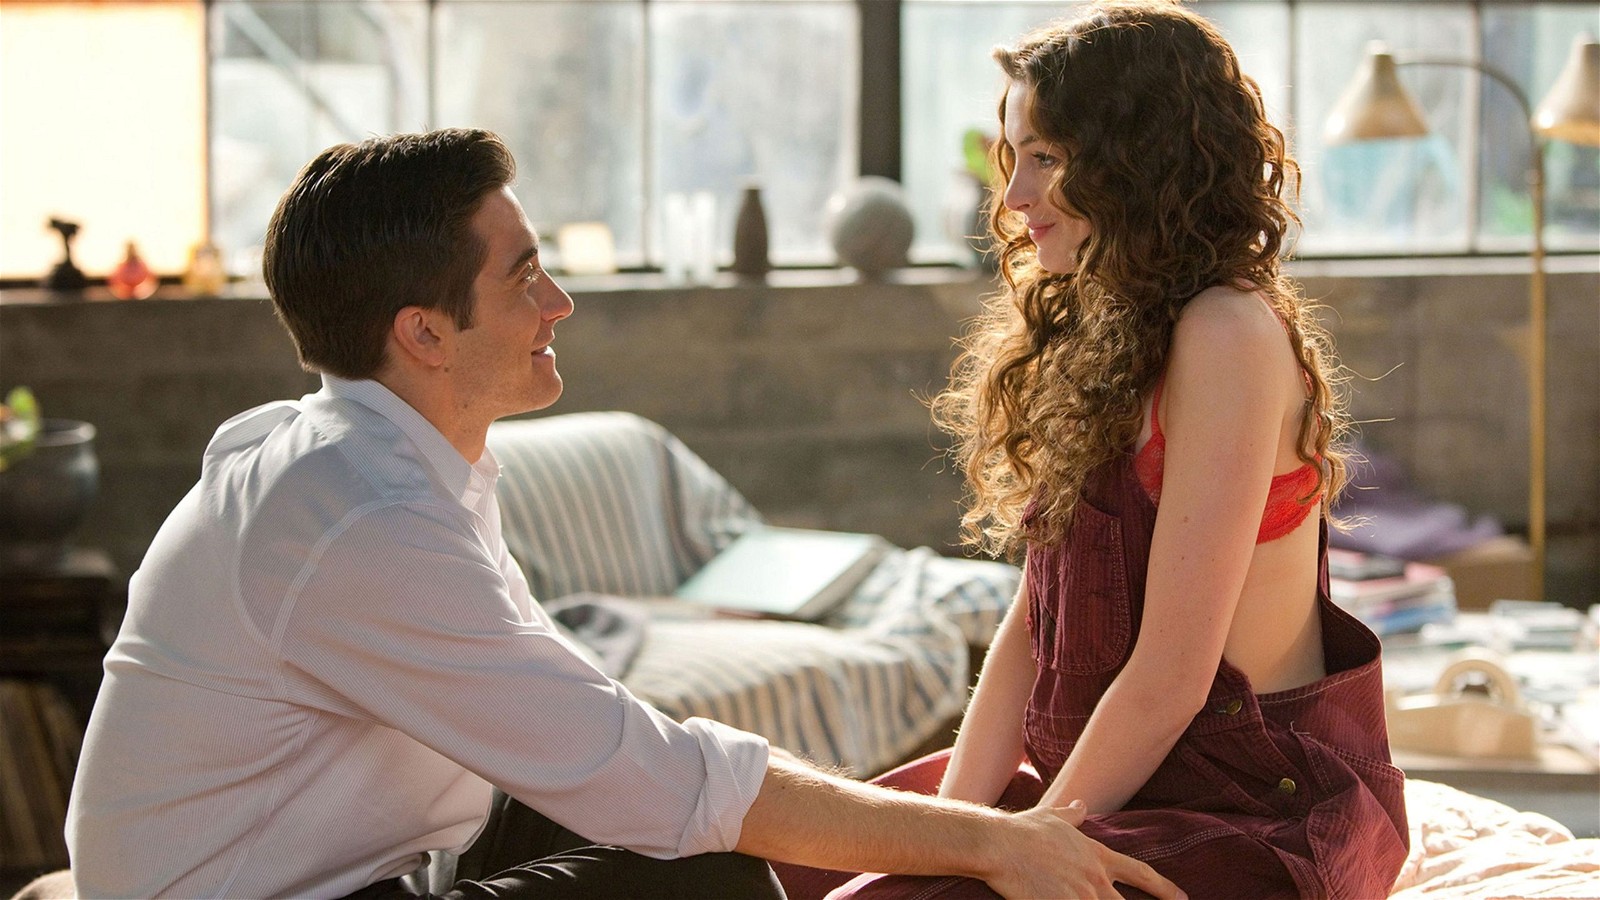 Jake Gyllenhaal and Anne Hathaway in a scene from Love & Other Drugs